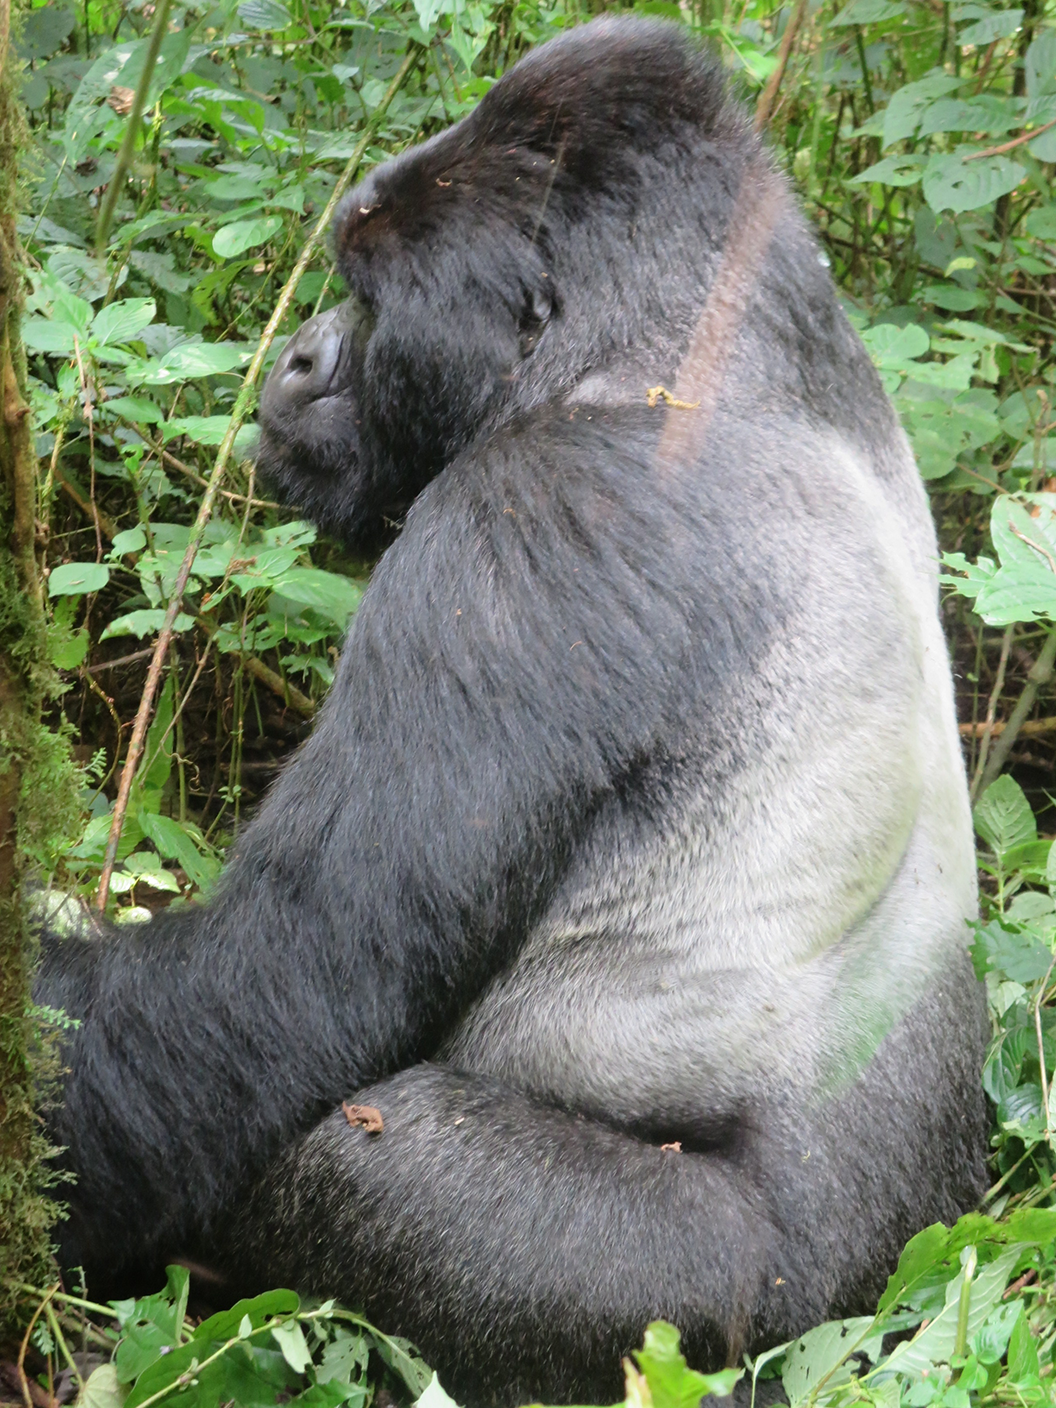 Living on Earth: At Home With Humba, the Mountain Gorilla